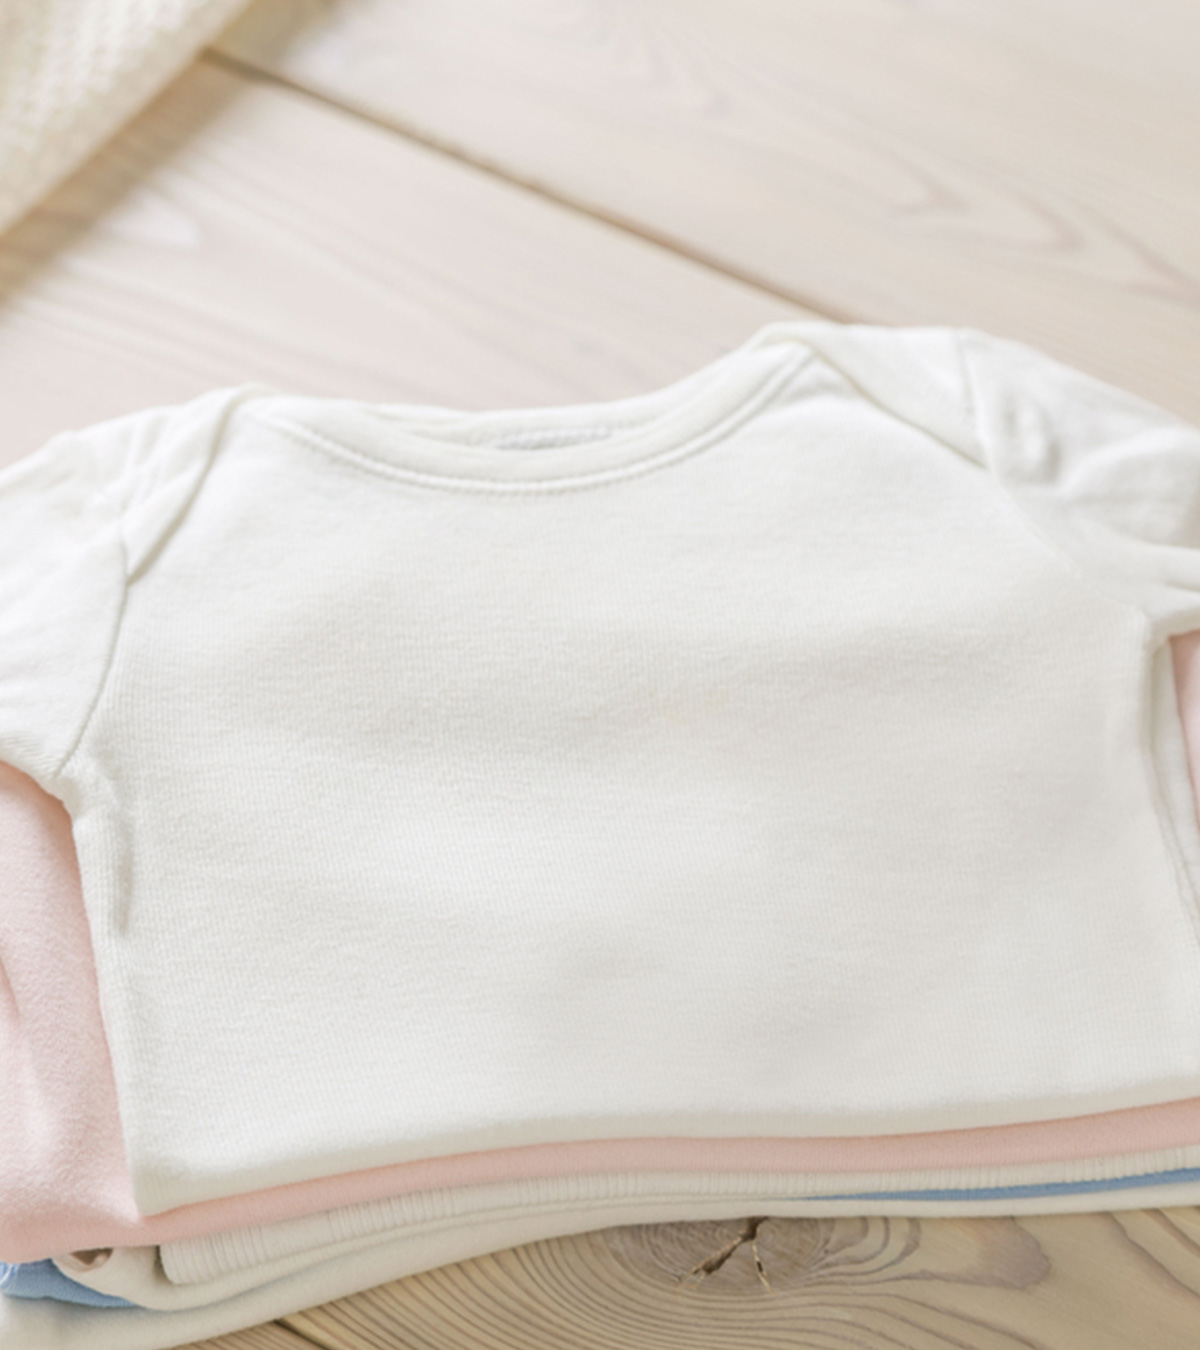 Why Is Organic Cotton Better For Your Baby?